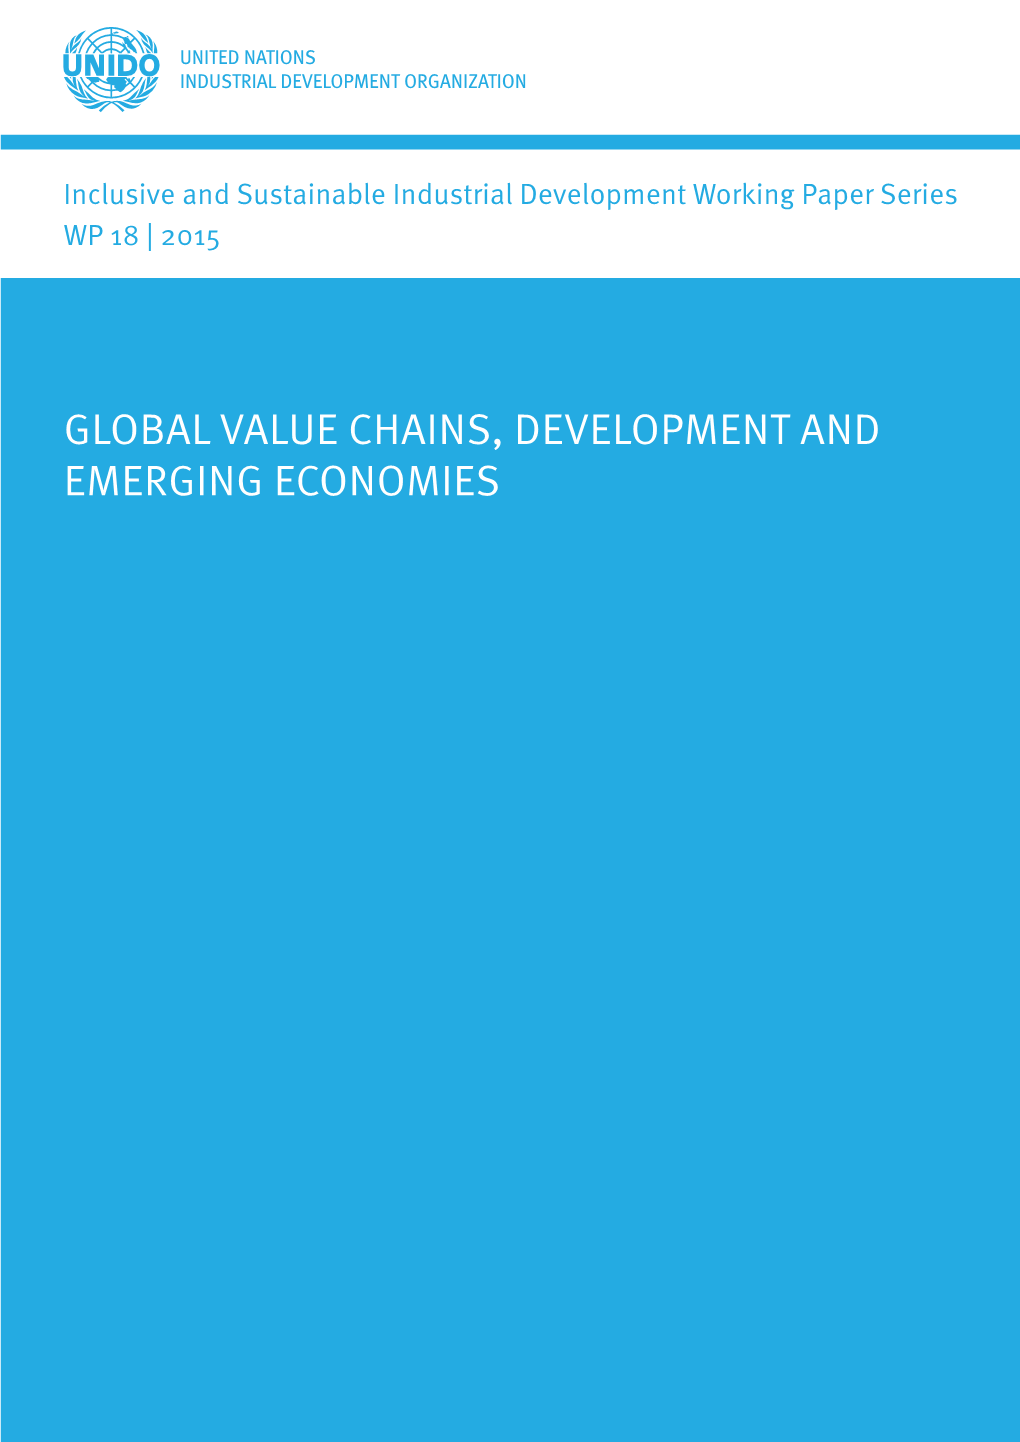 Global Value Chains, Development and Emerging Economies